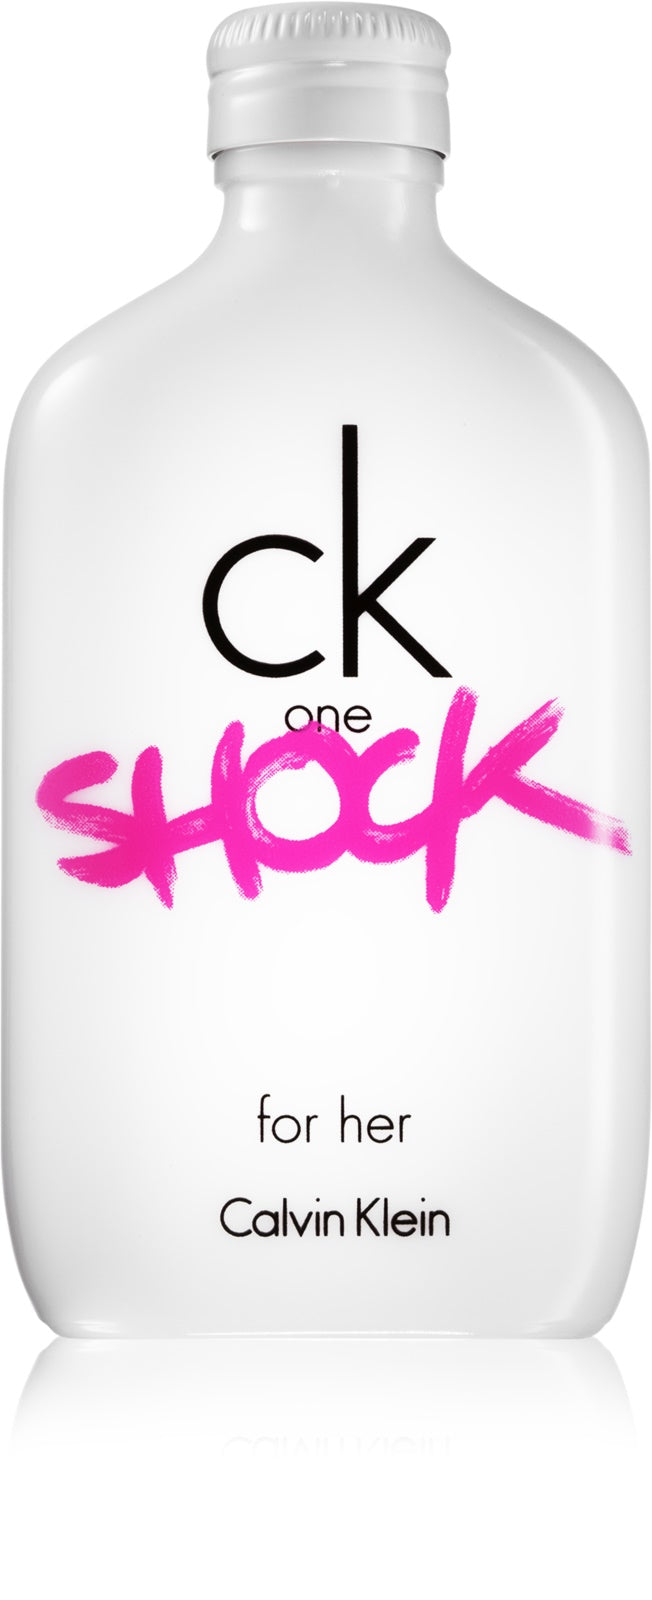 CK One Shock EDT for Her - Perfume Planet 